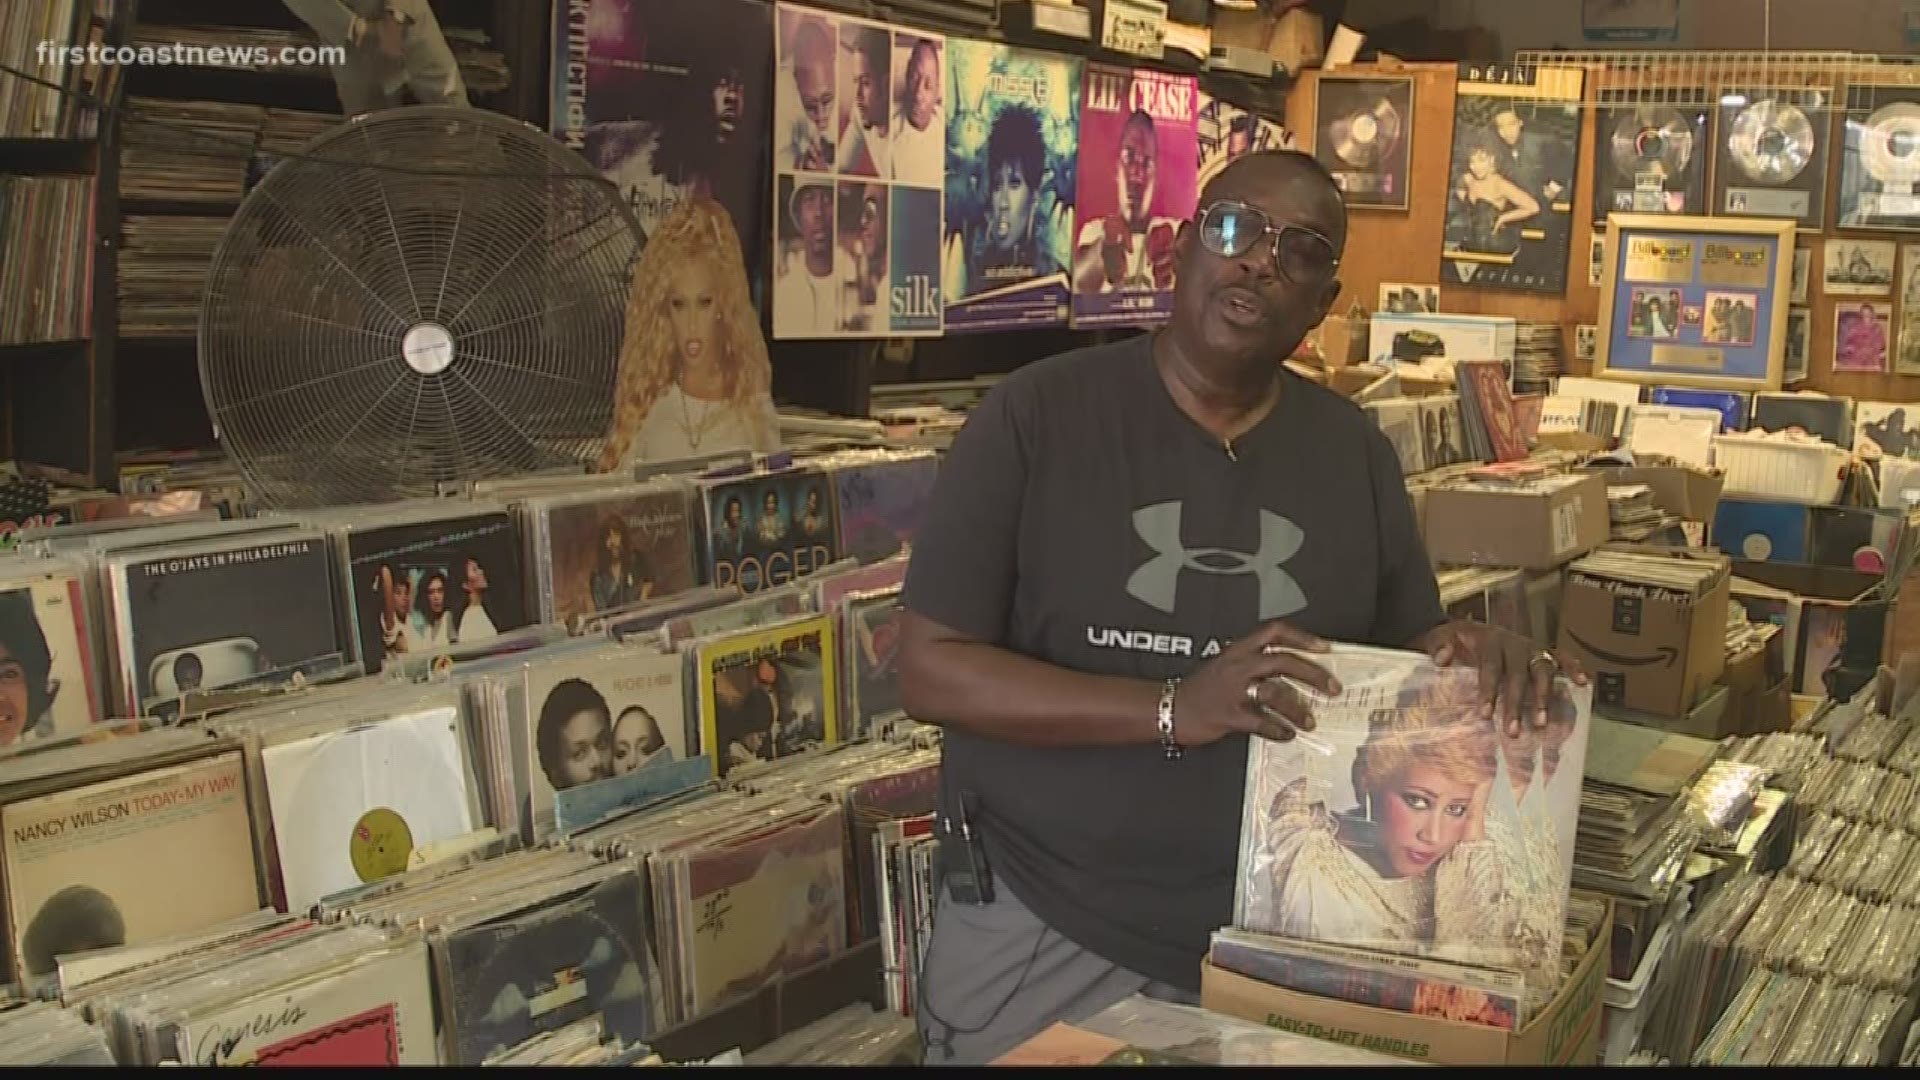 FCN visited a local record shop Friday where her music is still as popular as ever.